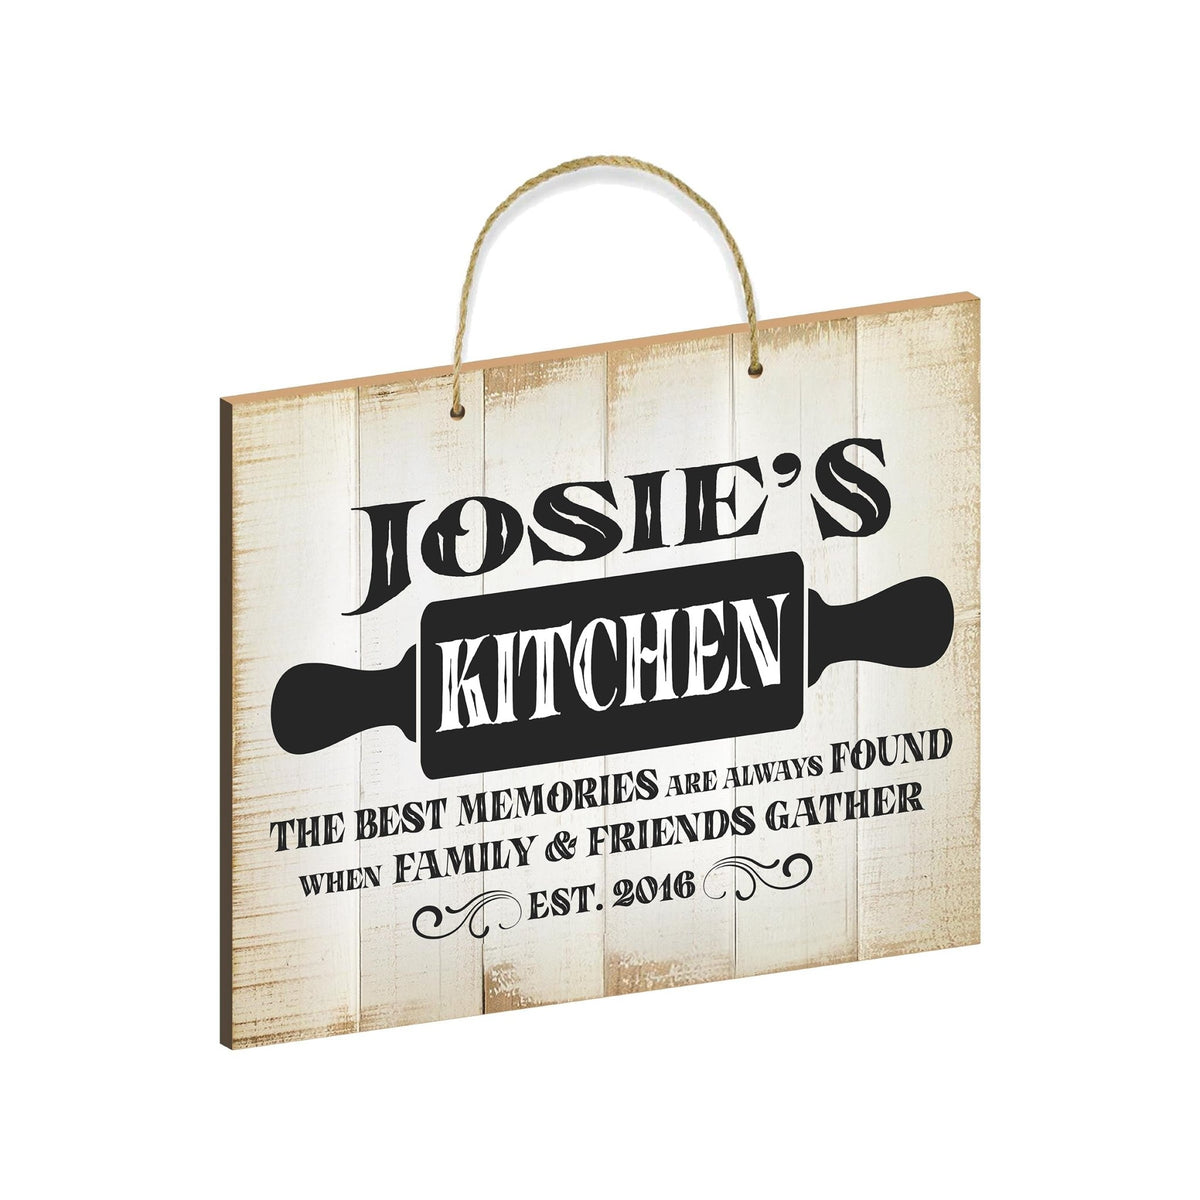 Rustic-Inspired Wooden Wall Hanging Rope Sign For Kitchen &amp; Home Décor - Memories